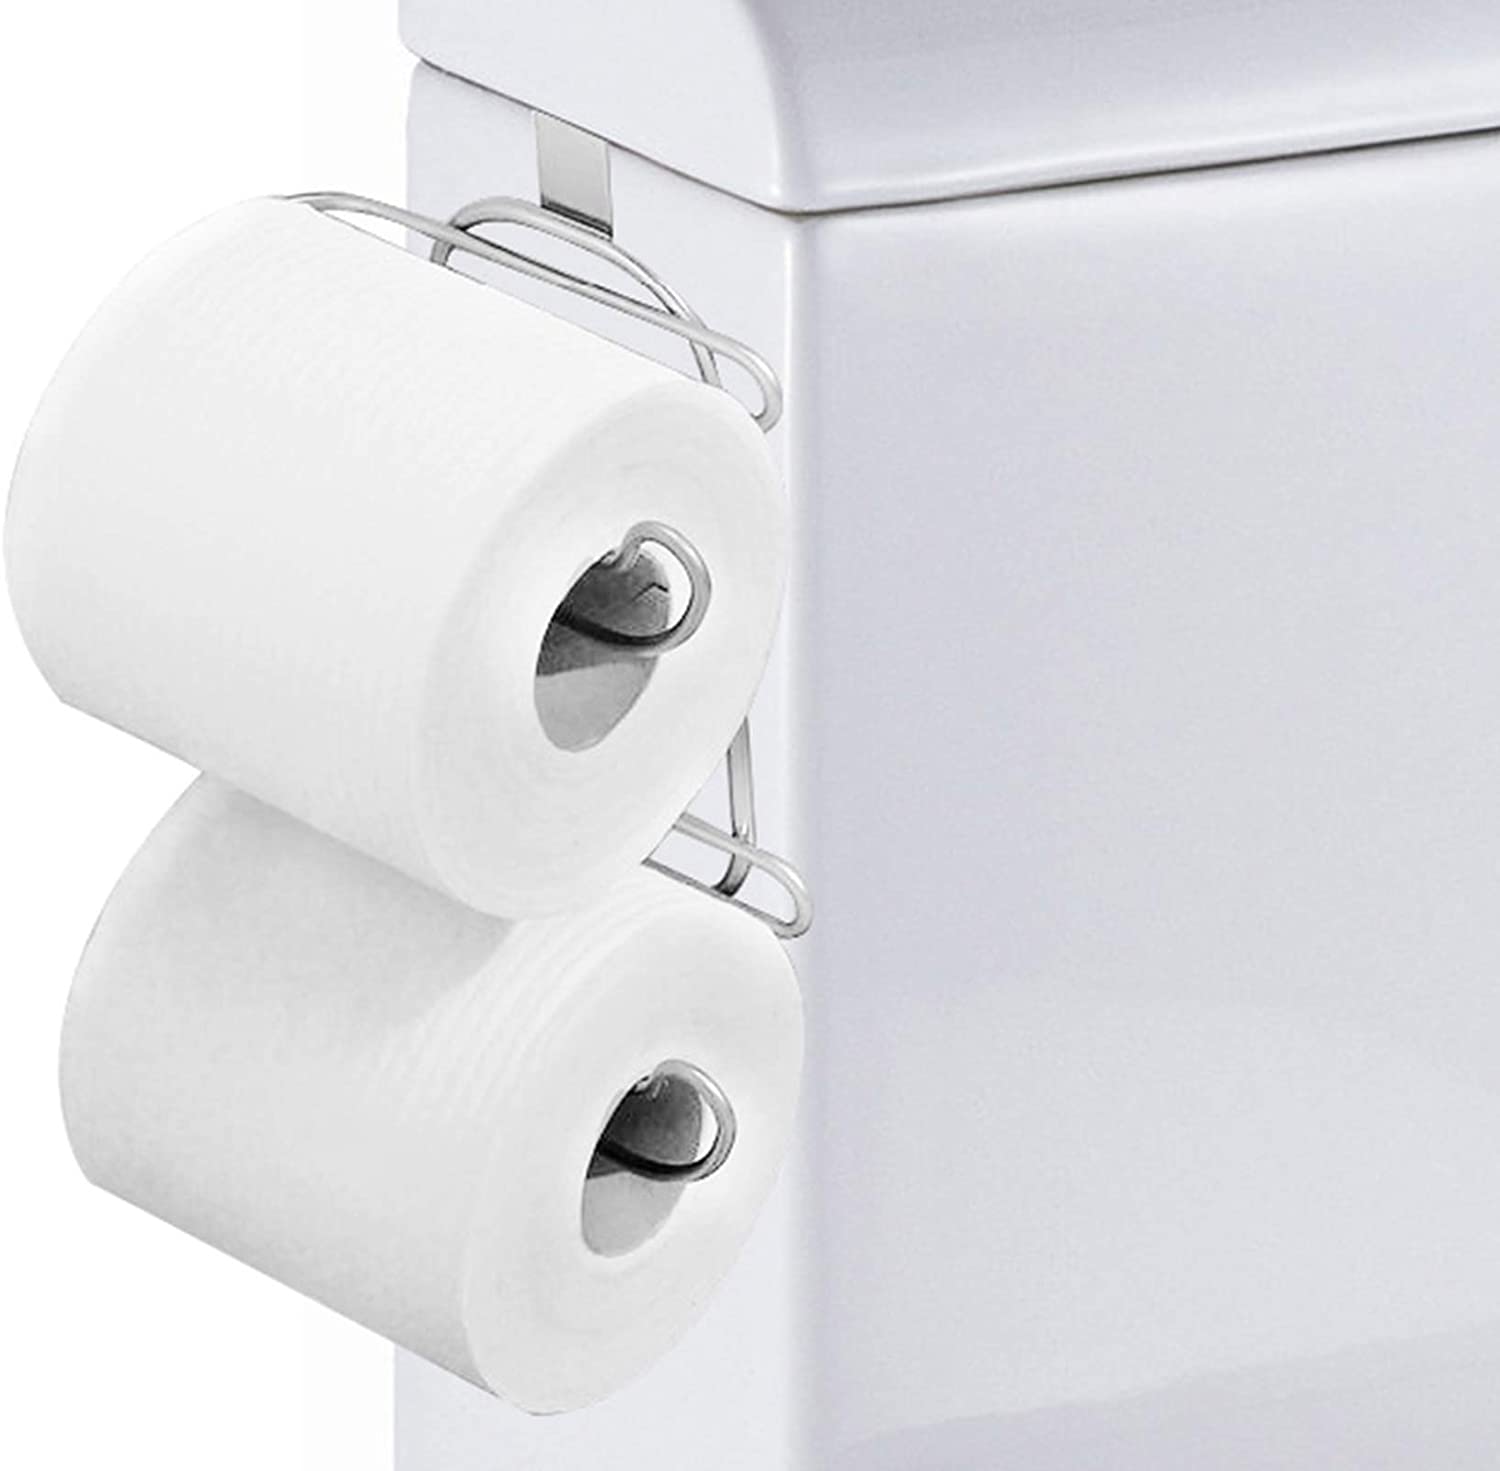 A toilet paper holder that attaches to the tank for smart bathroom storage!